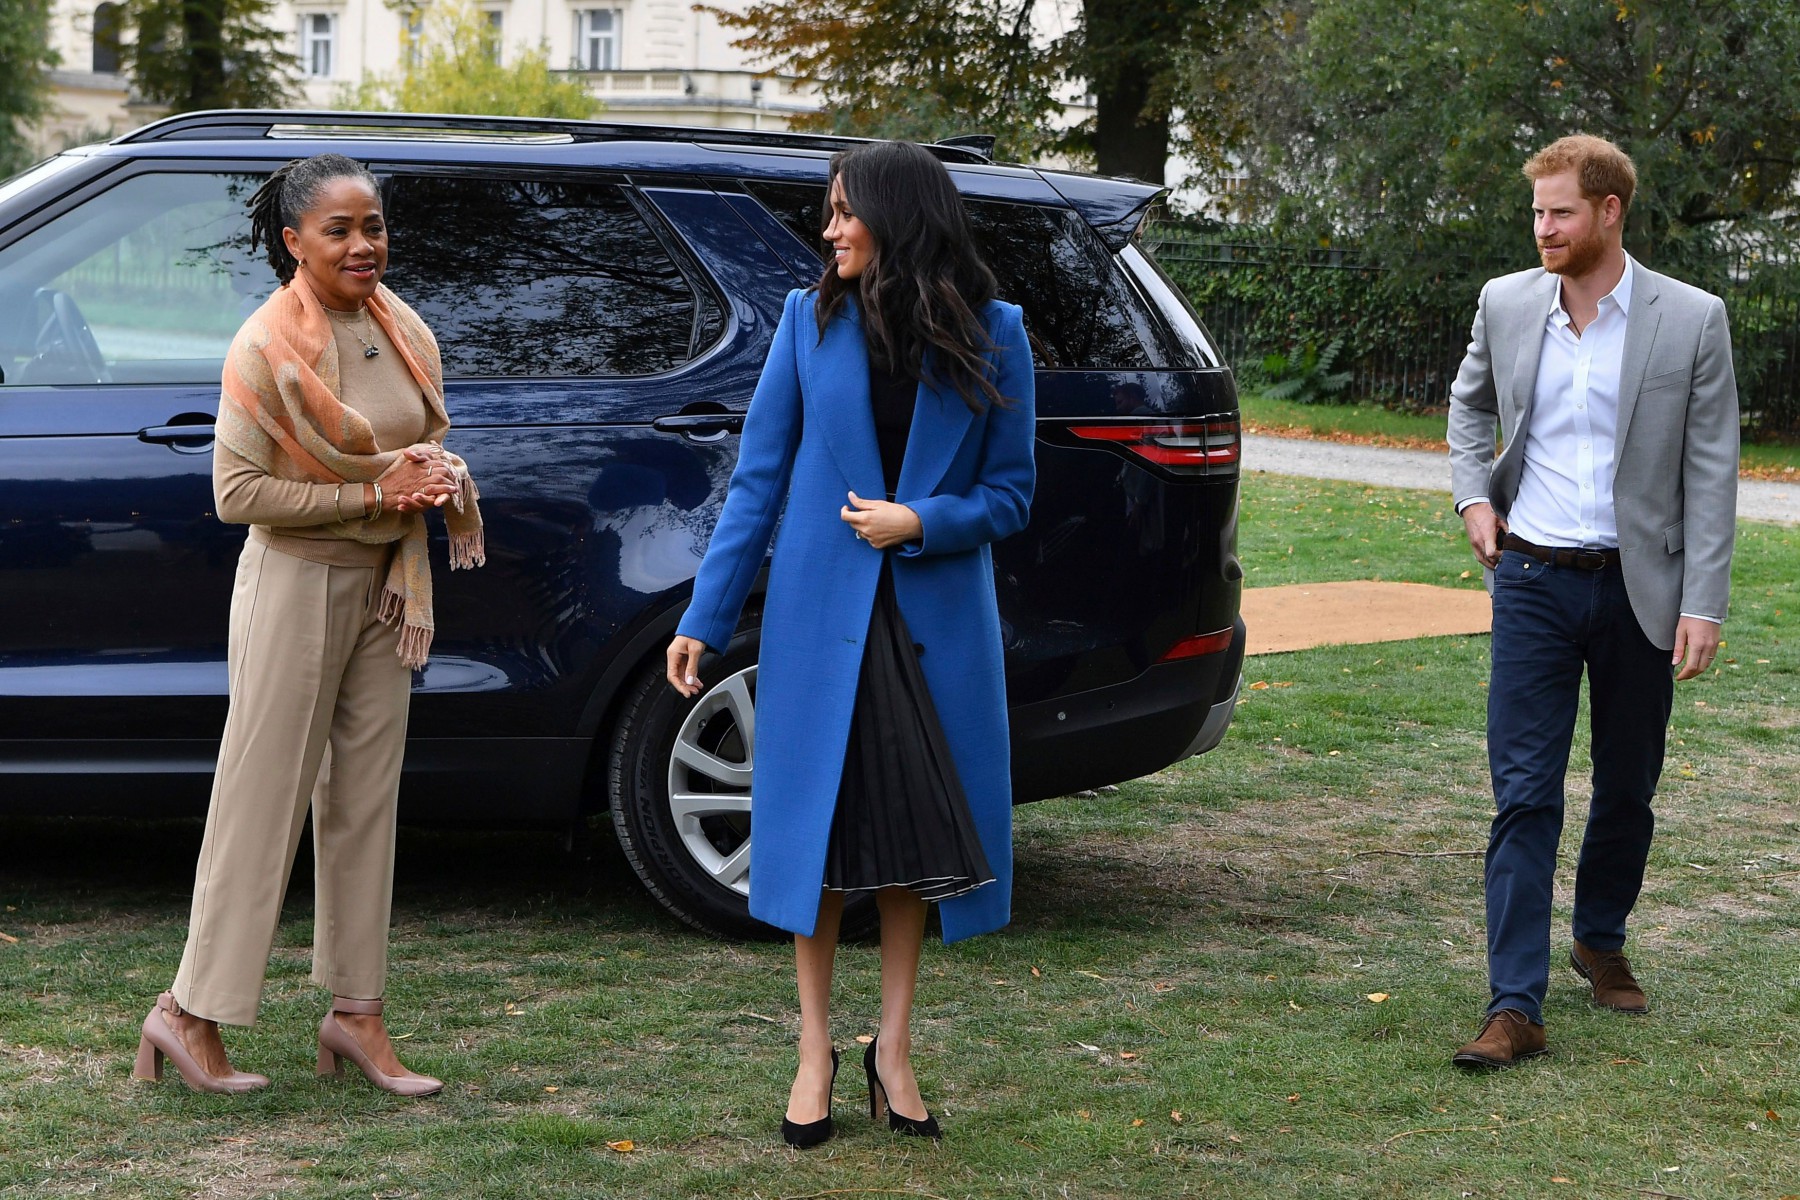 They will reportedly spend the holiday with Meghan's mum, Doria